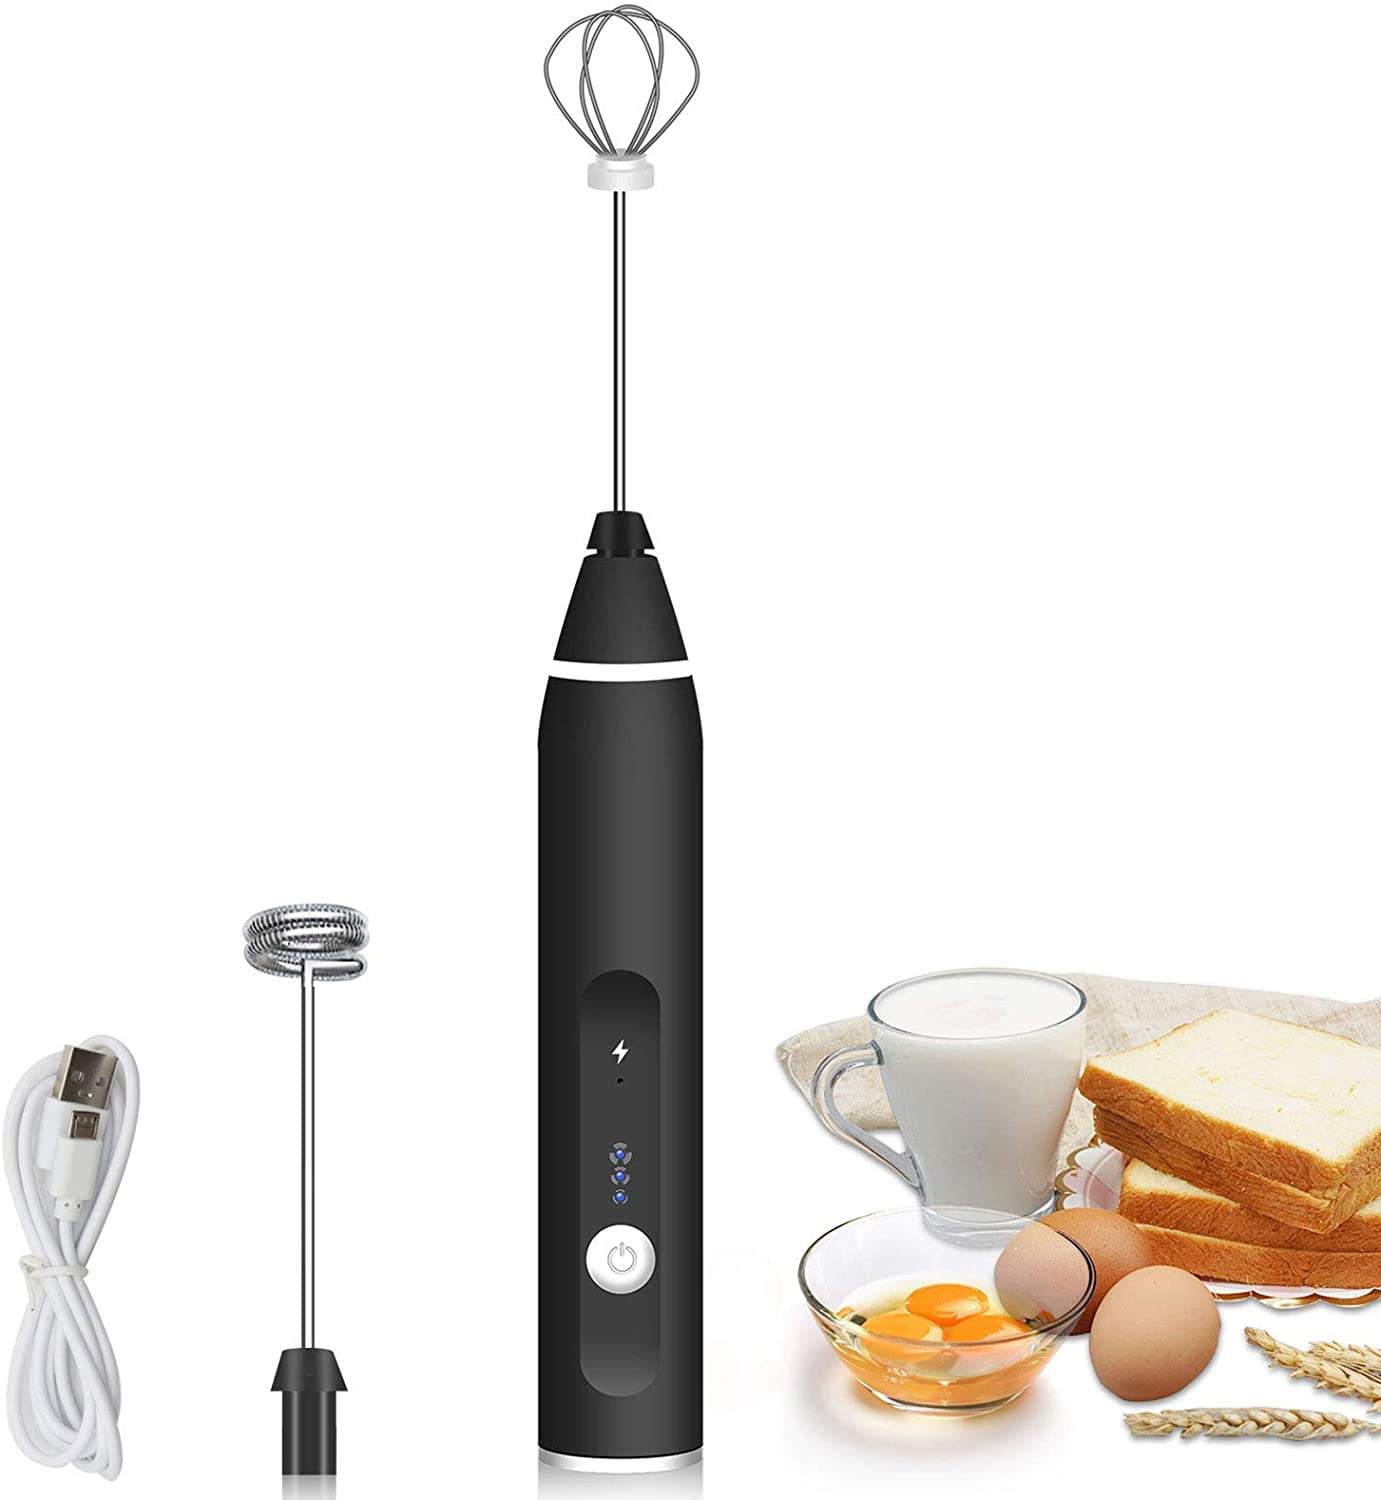 USB Rechargeable Handheld Whisk Coffee Foam Maker Electric Milk Frother 3 Speed 